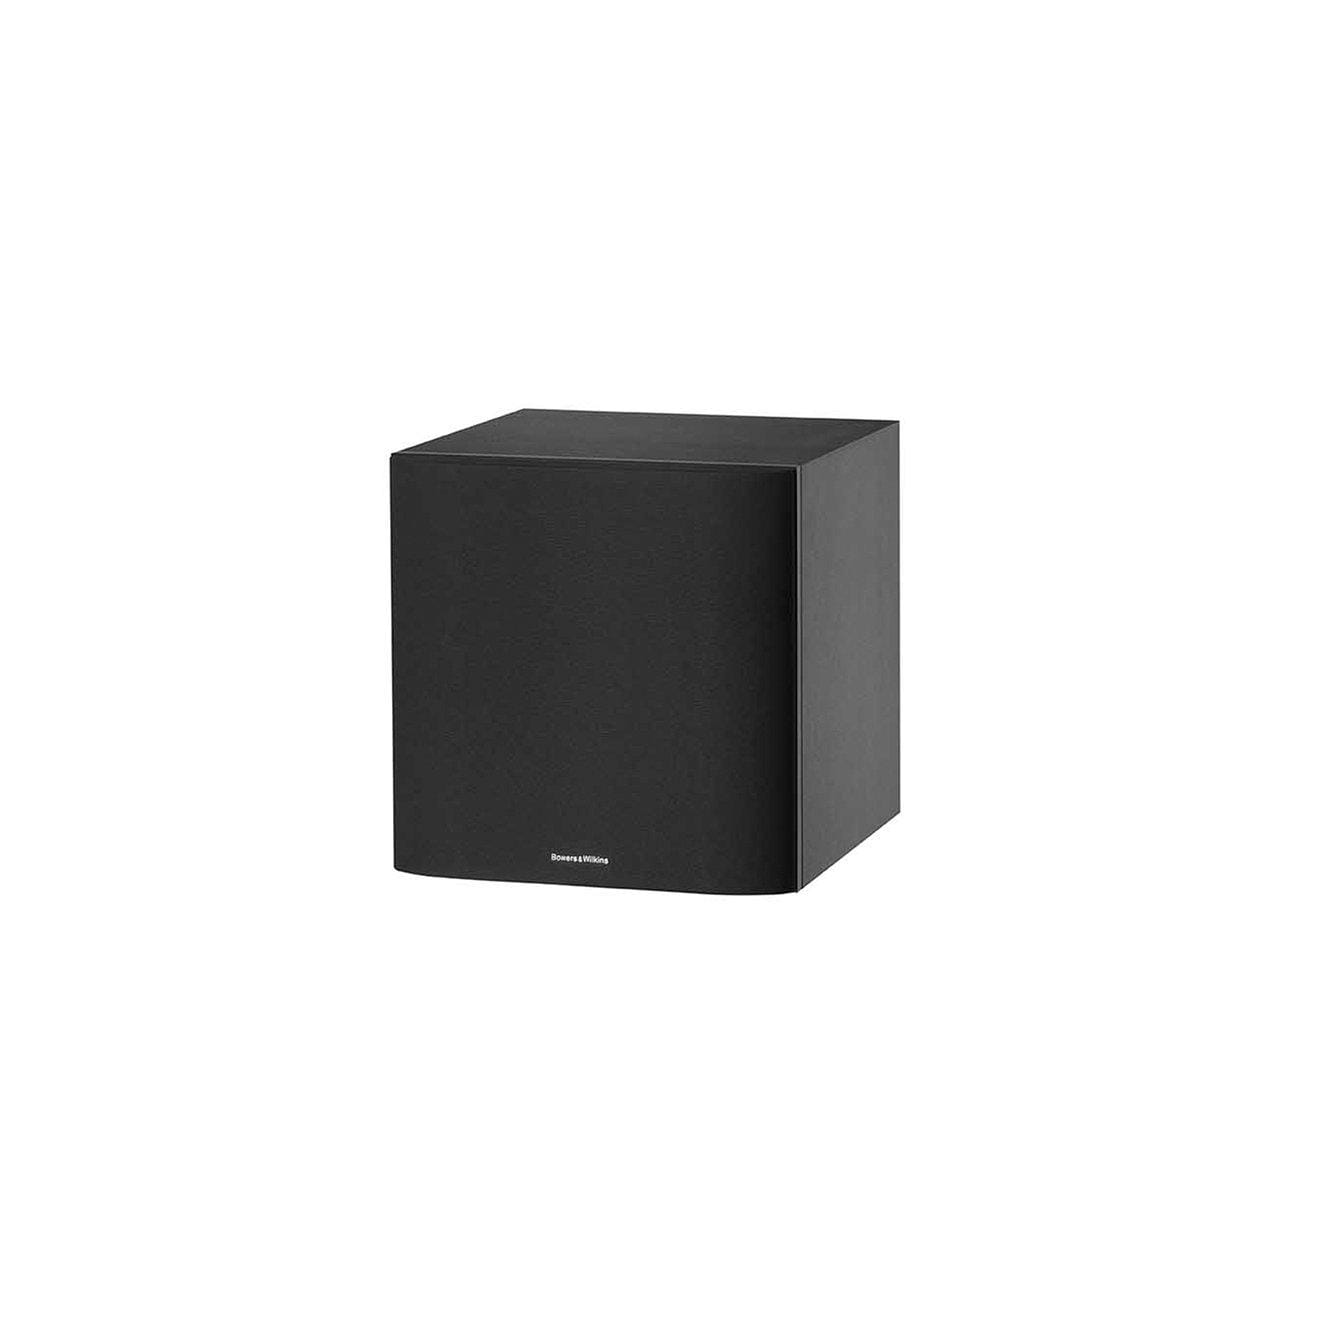 Bowers & Wilkins Subwoofers B&W ASW610XP 10-Inch 500W Subwoofer - Matte Black